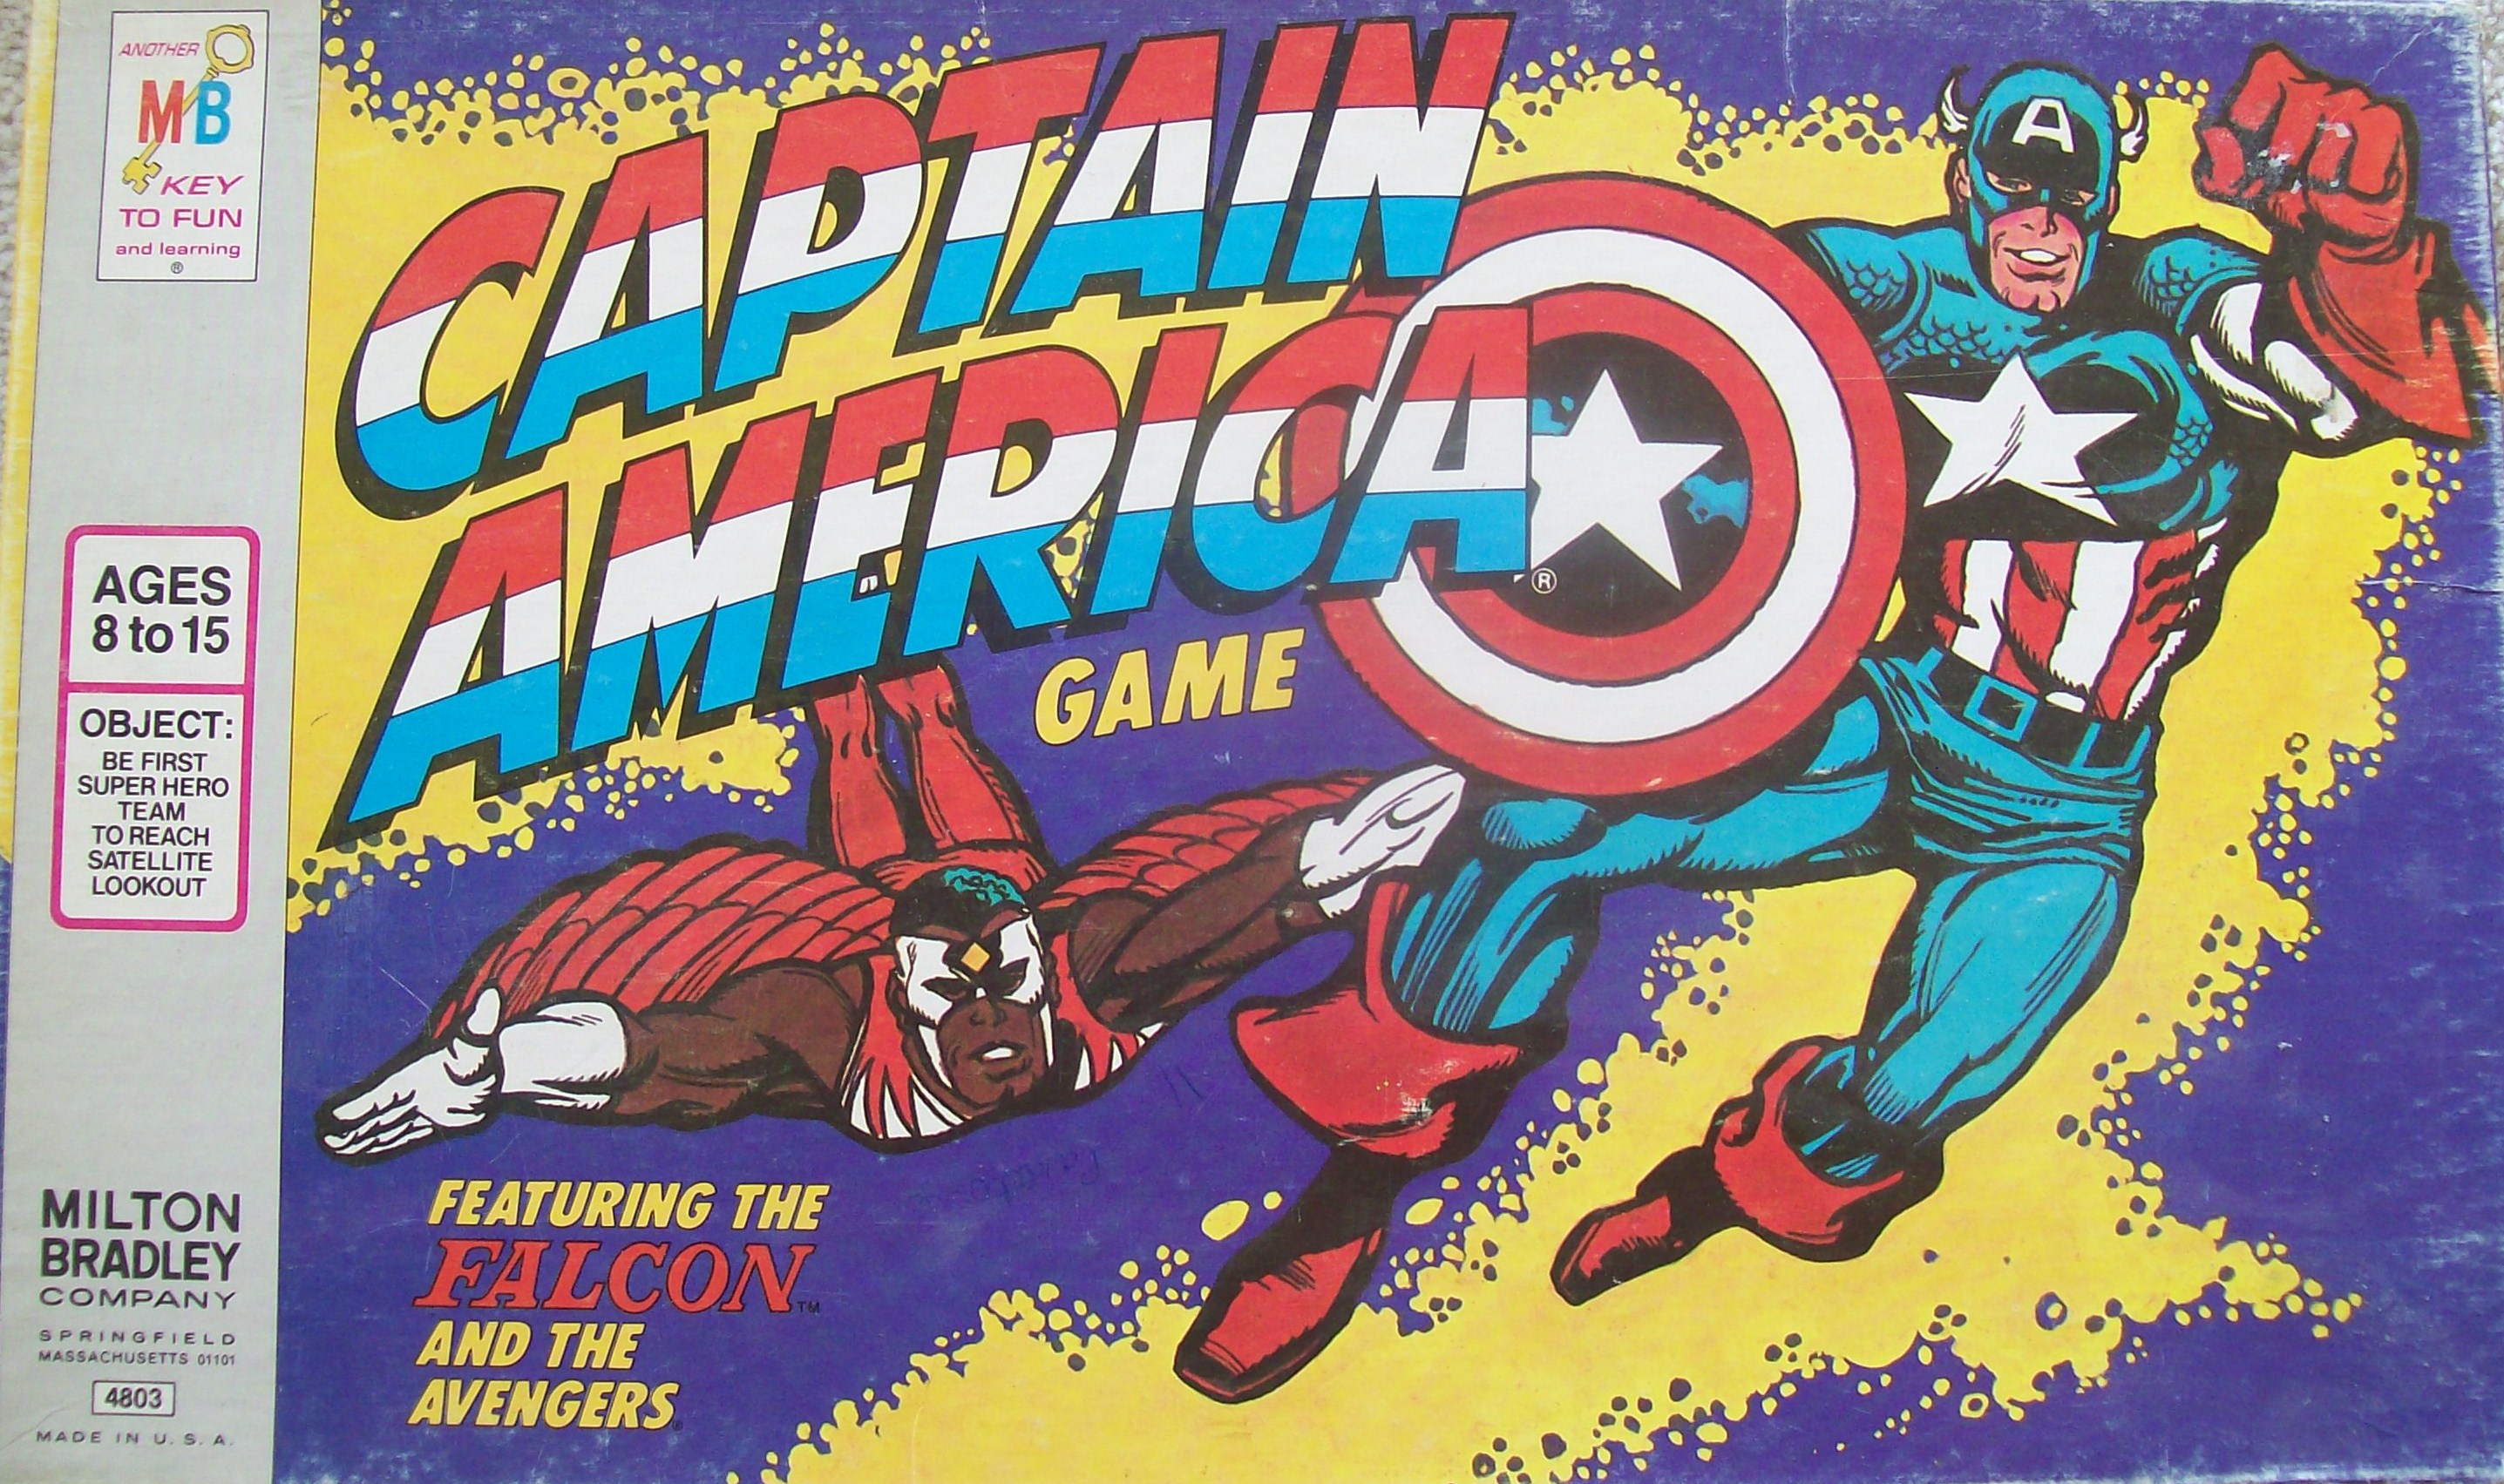 Collectible Board Game of Captain America